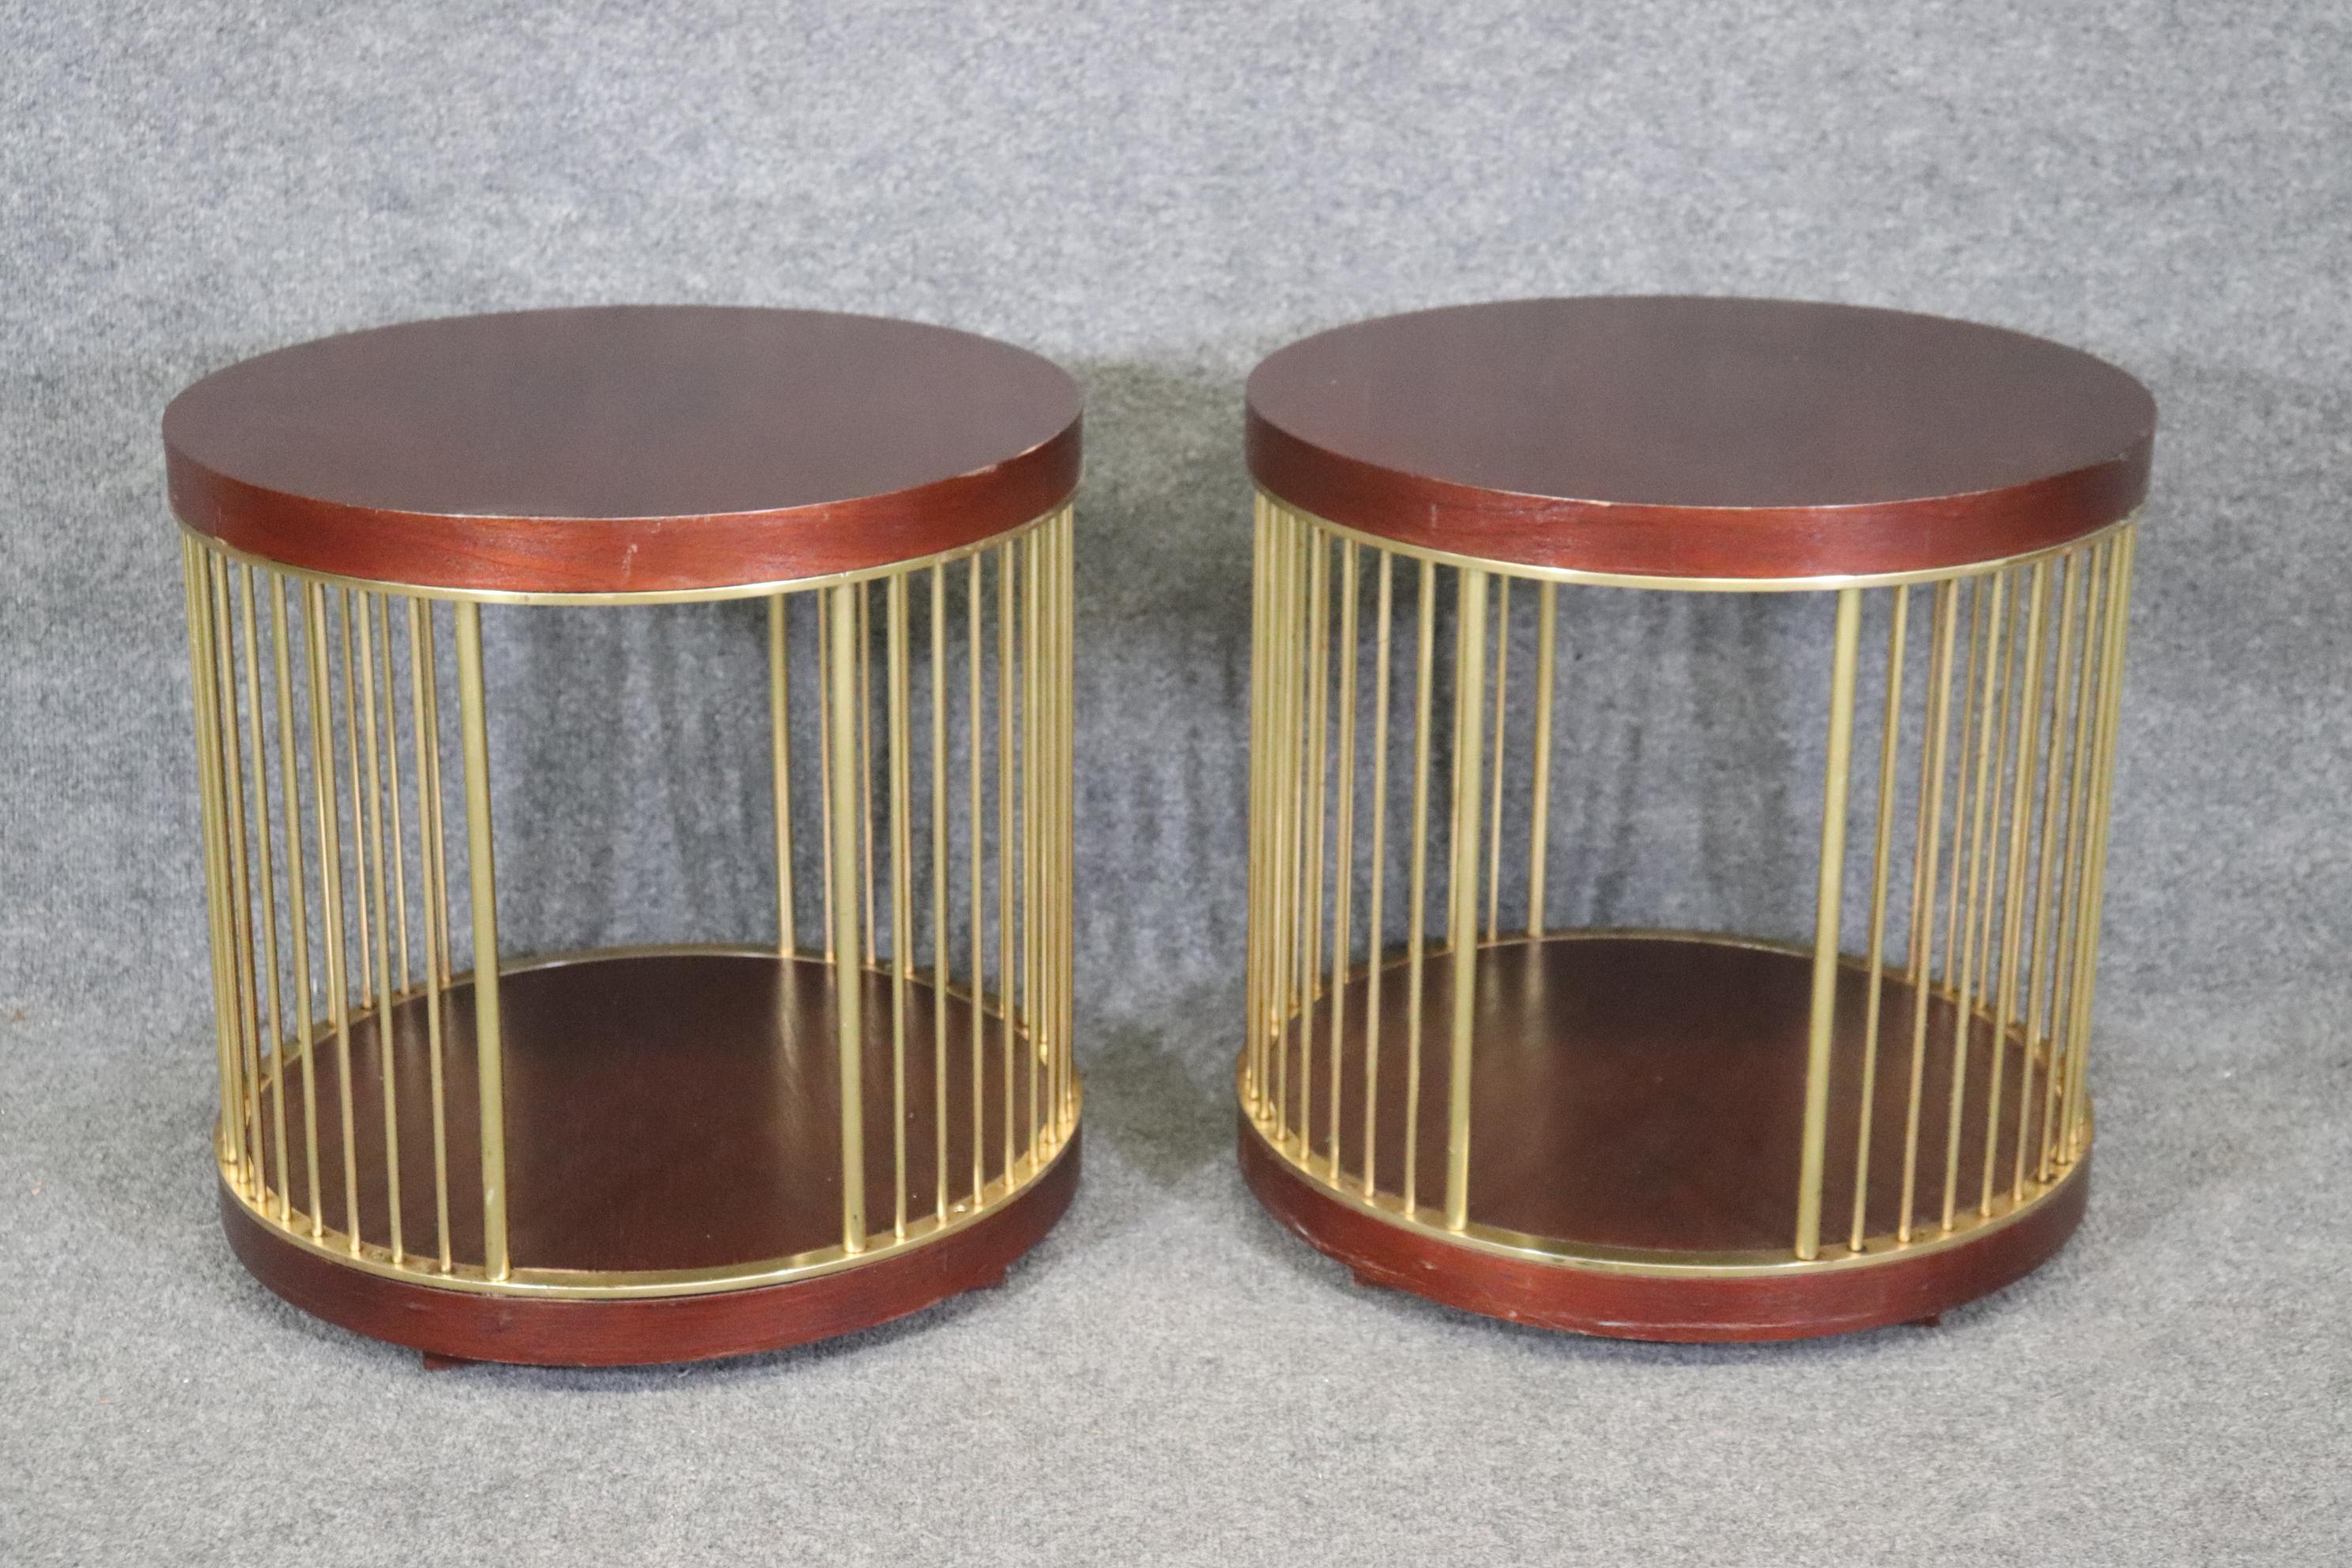 This is a gorgeous pair of Paul McCobb style circular end tables with brass rods and a cage style base with mahogany tops and bases. The tables are in good used condition with minor scuffs and signs of use. The tables are each from the 1970s era and